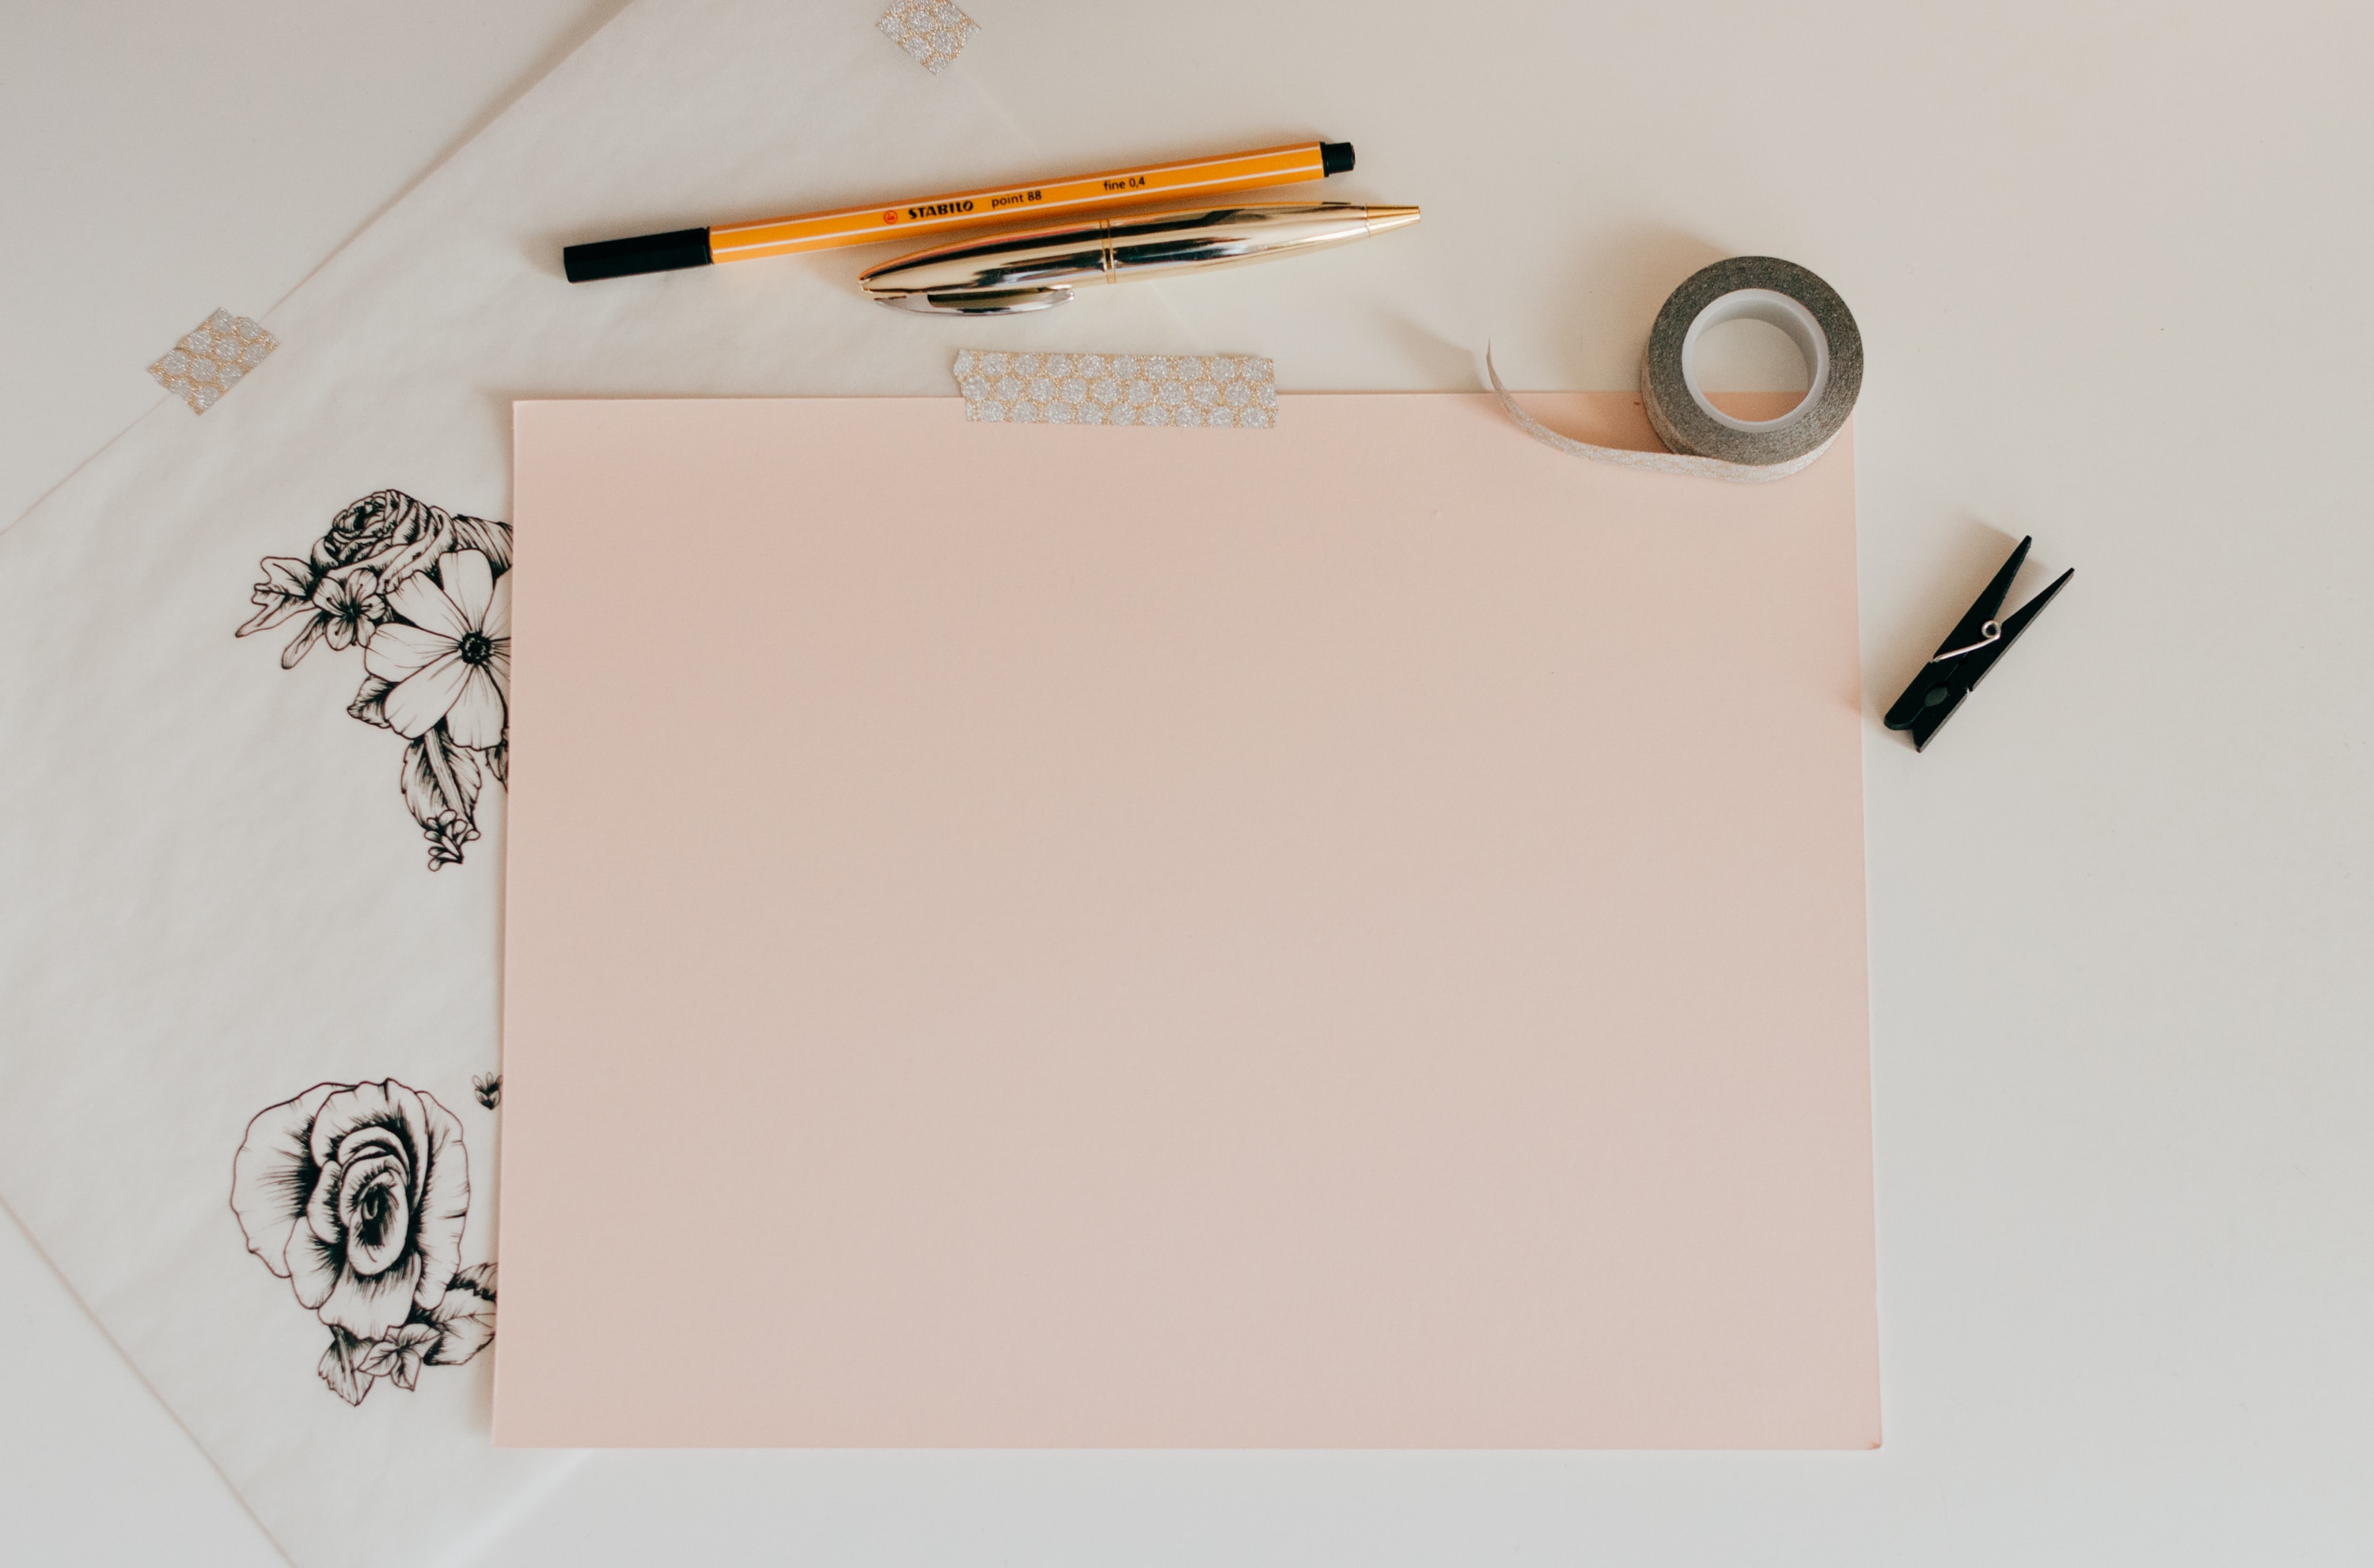 How to Create Homemade Canvas for Artwork - Step-by-Step Guide